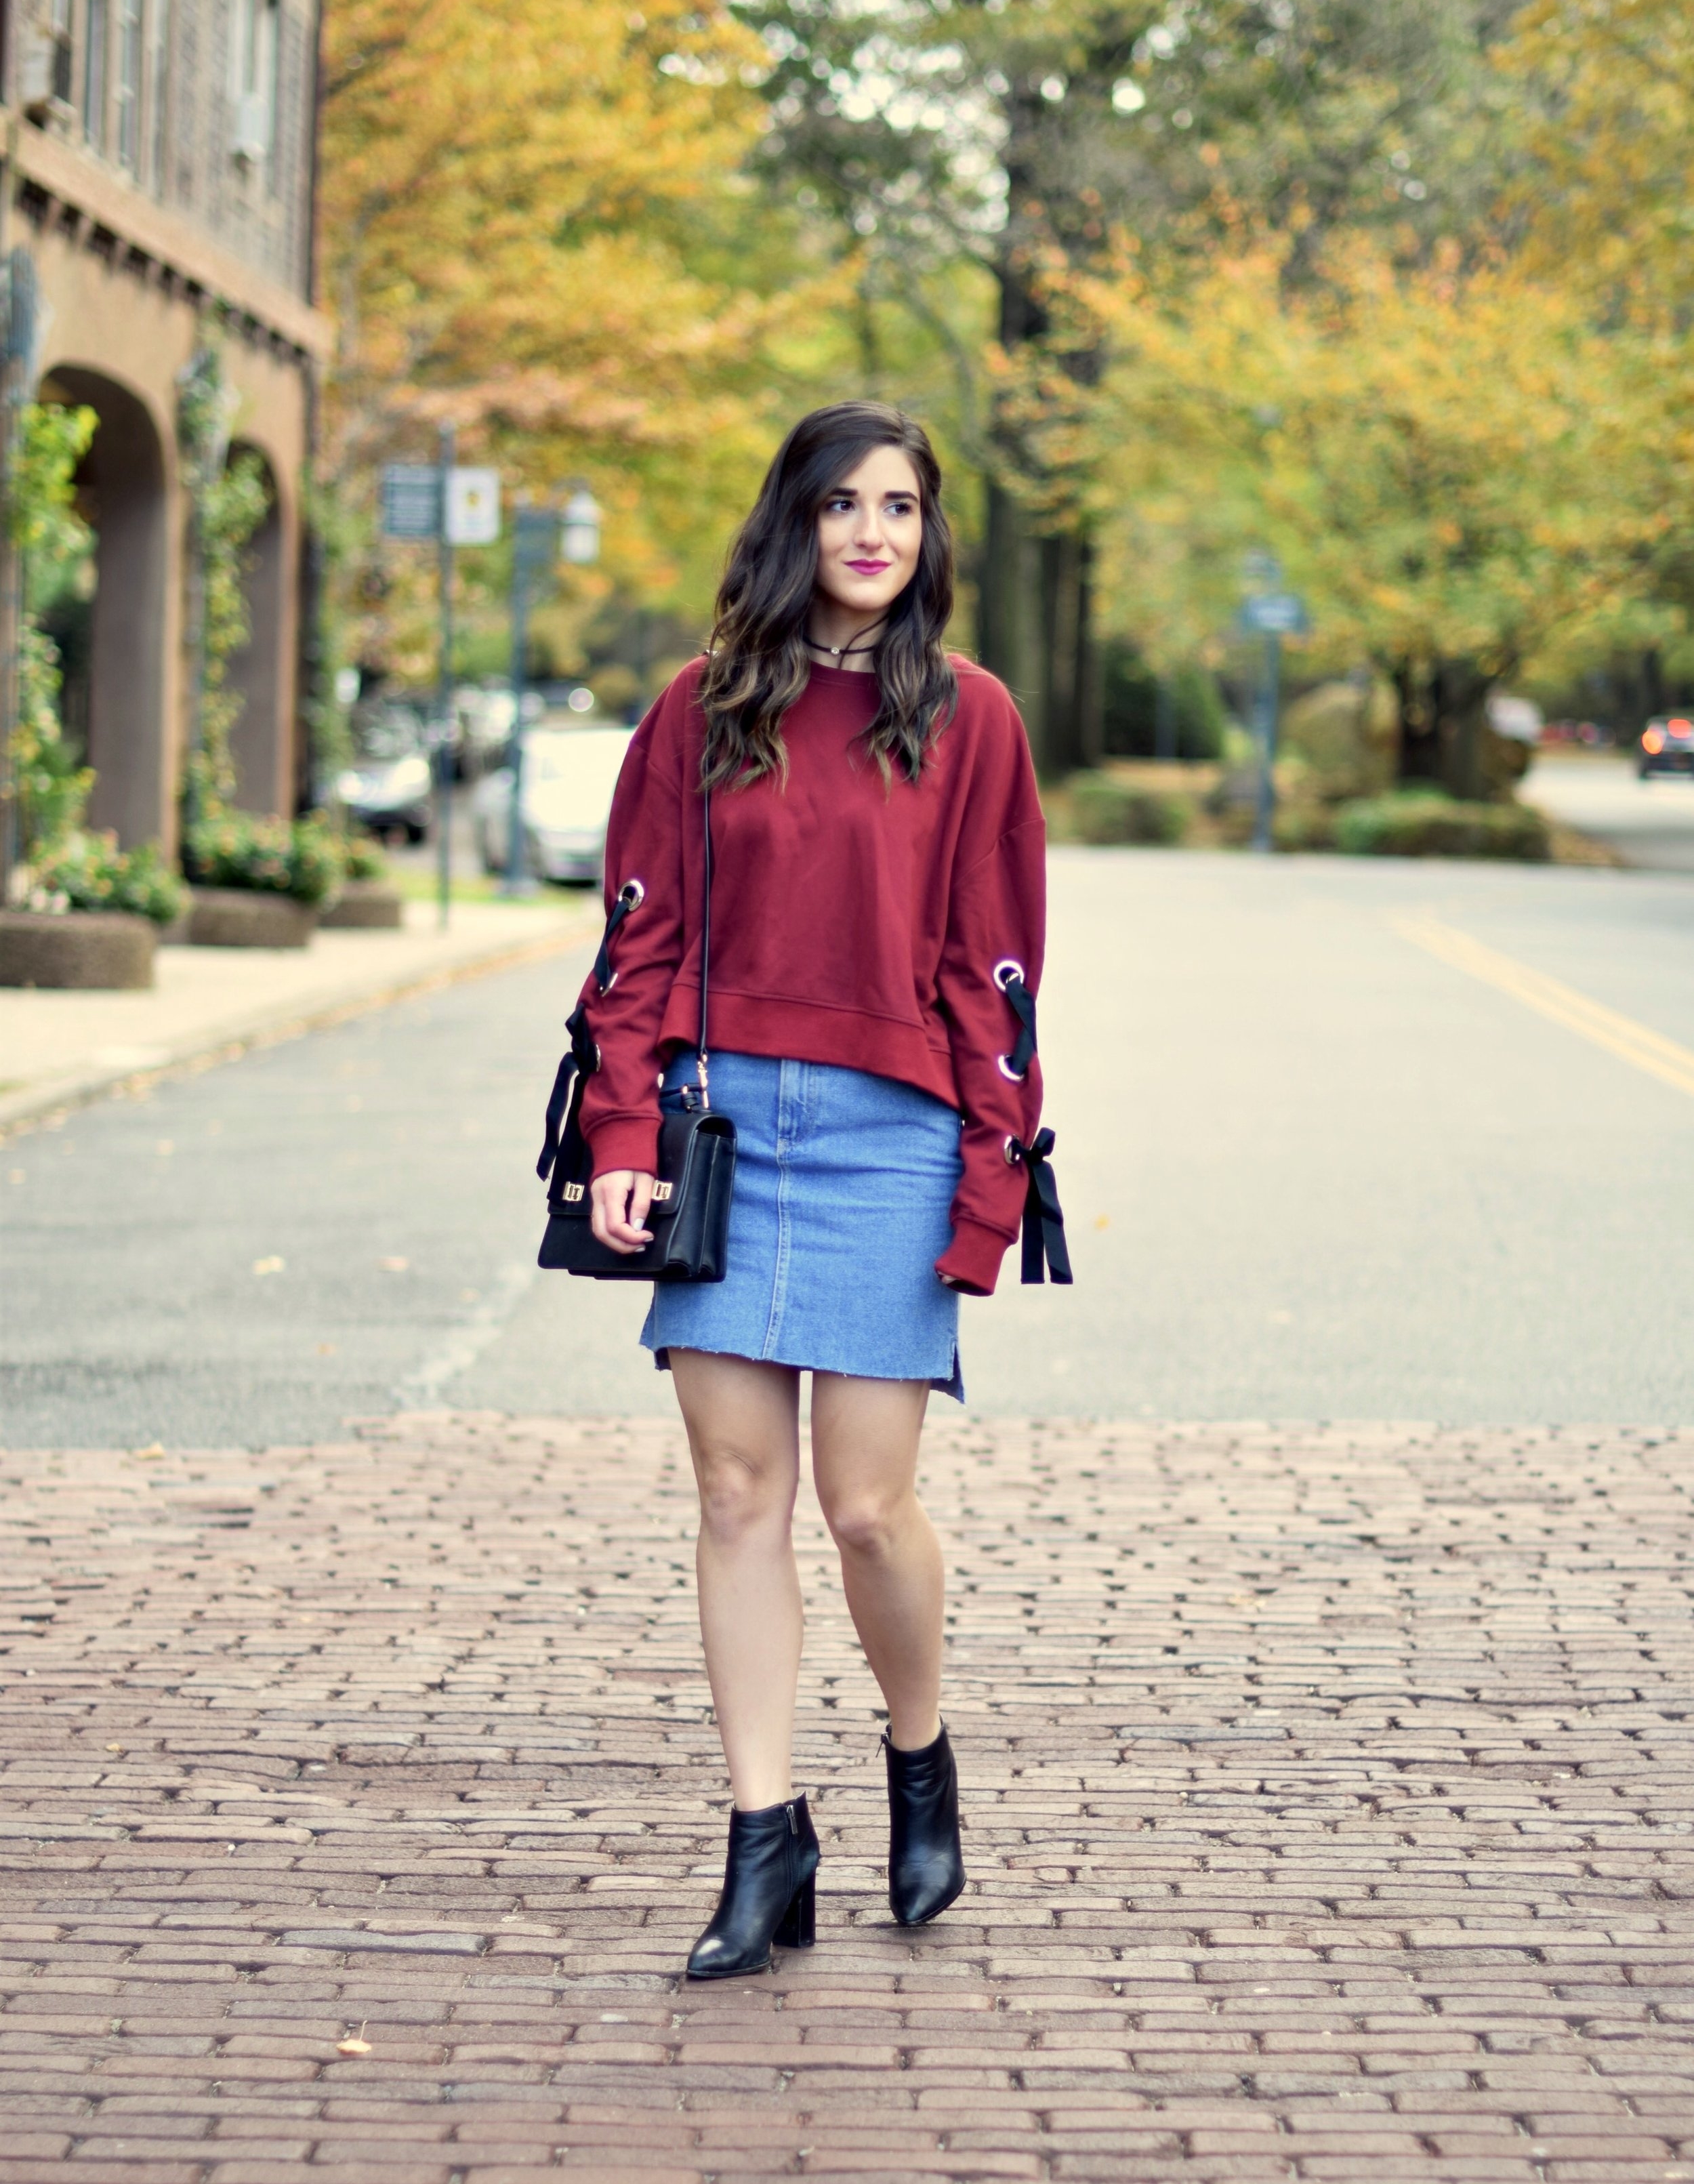 Red Lace-Up Sleeve Sweatshirt + Denim Skirt // 10 Things I'm Thankful For  This Year — Esther Santer